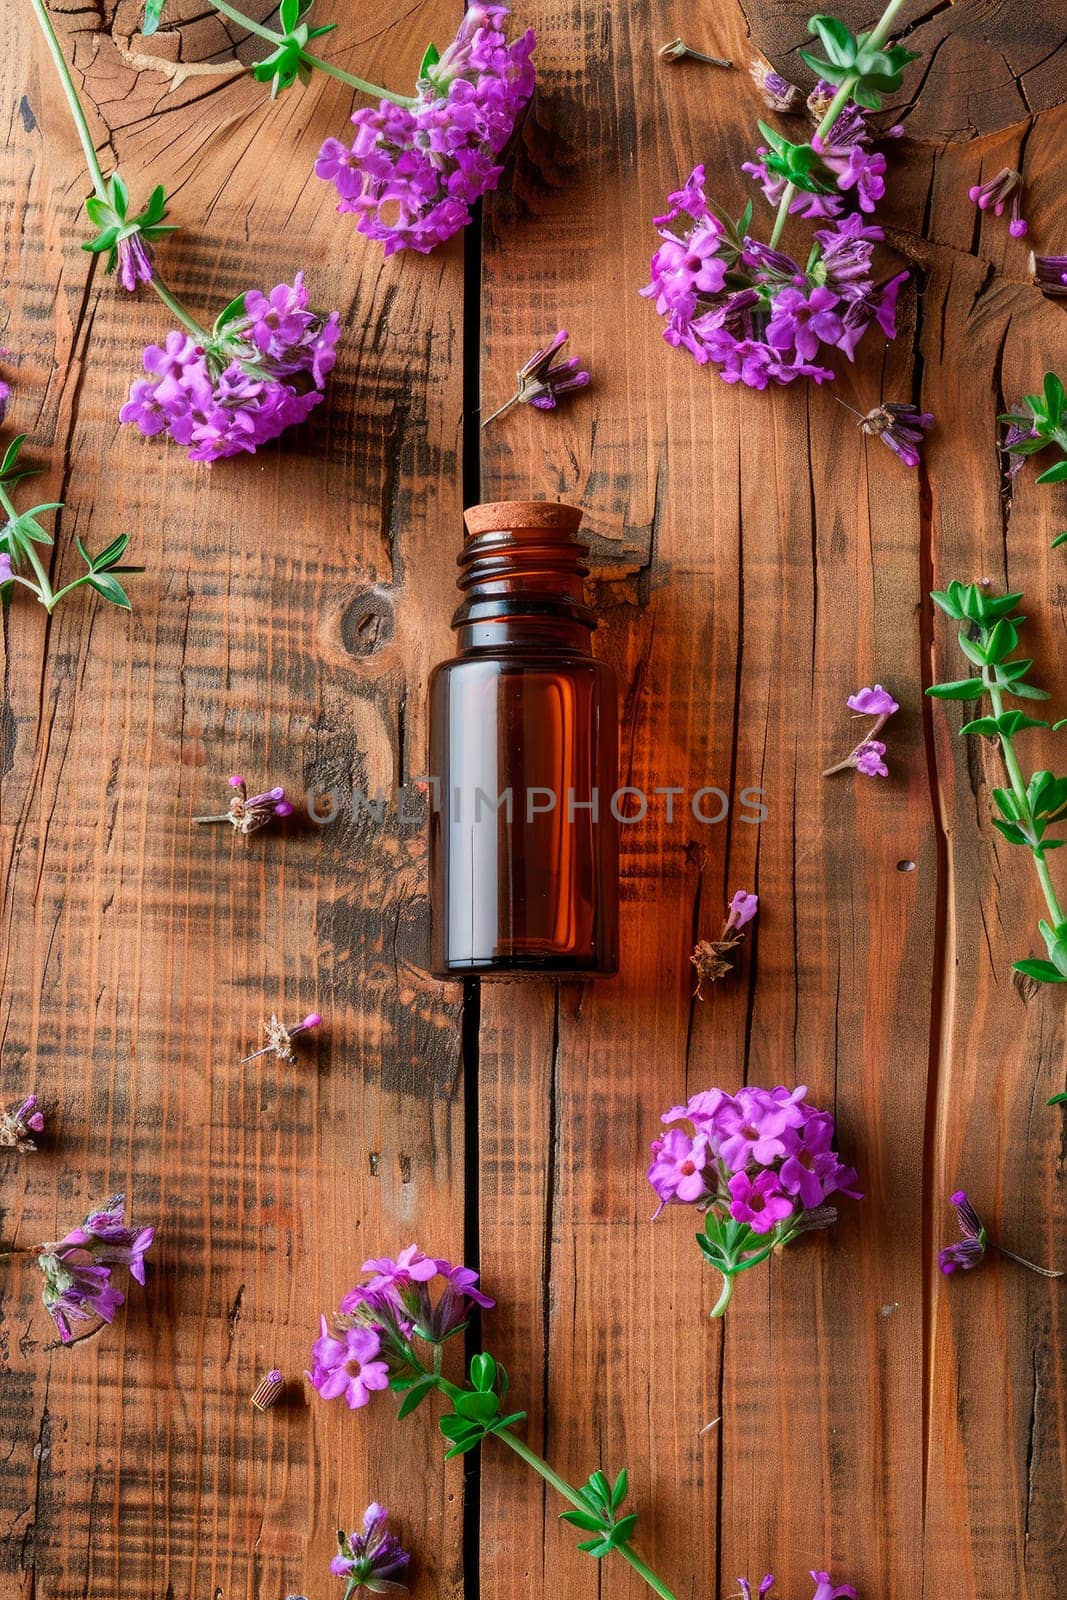 verbena essential oil in a bottle. selective focus. nature.